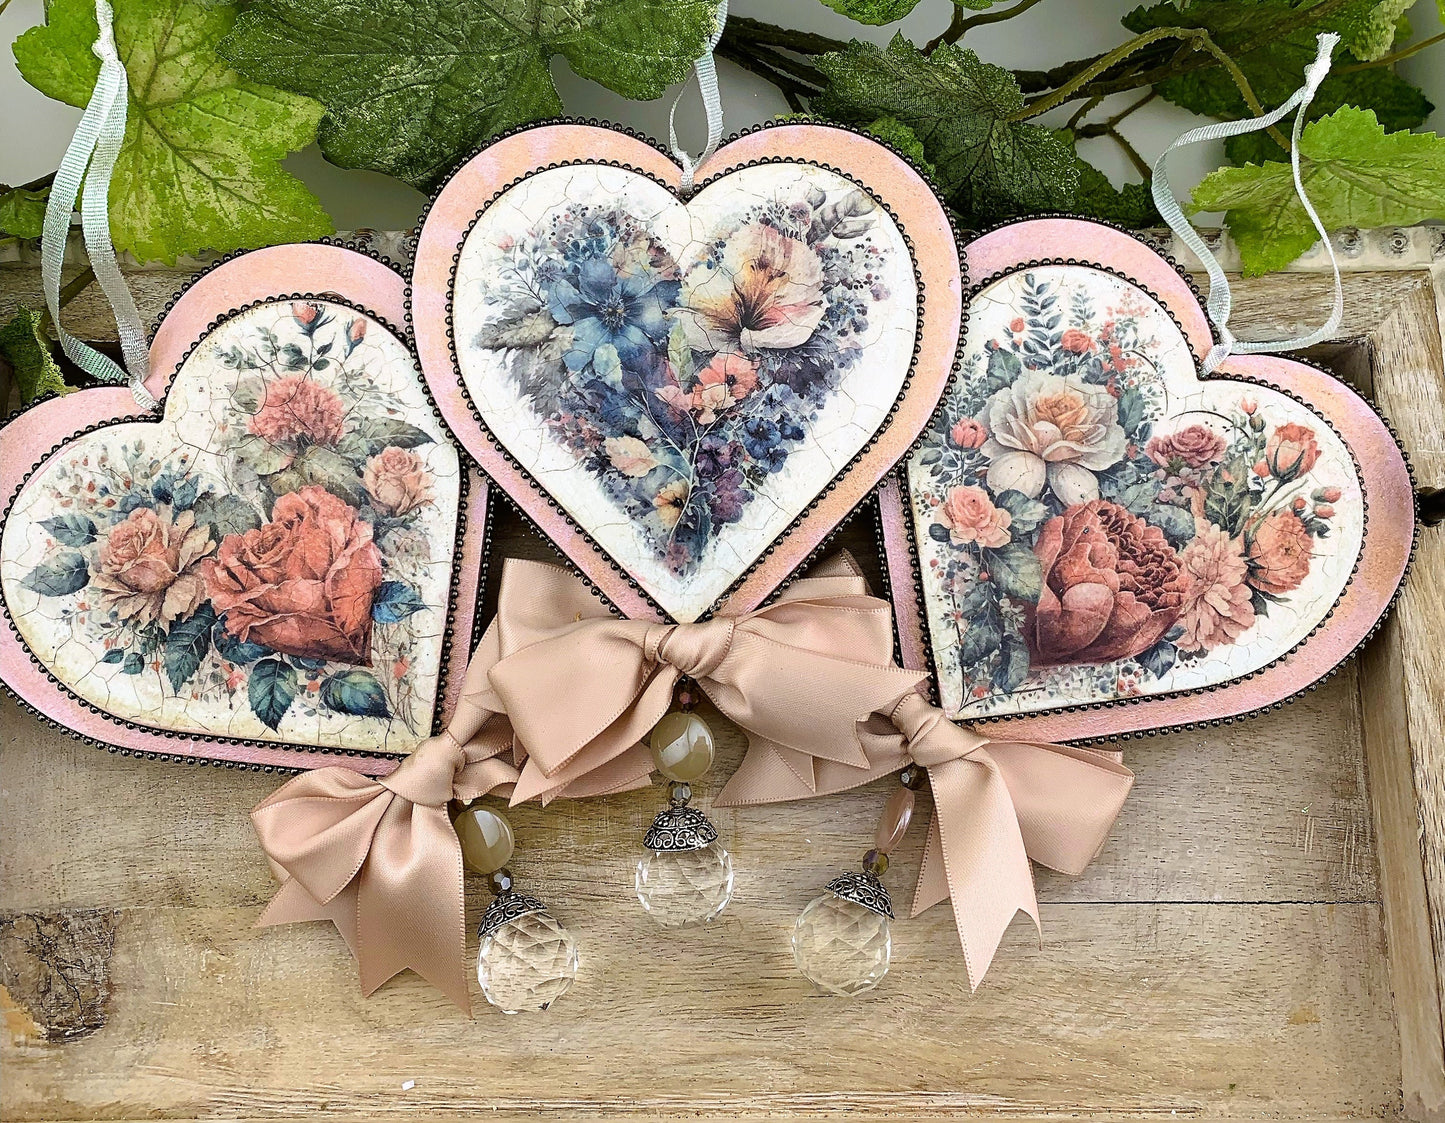 Handcrafted Shabby Chic Valentine Roses Heart Ornament Set of 3, Decoupage MDF Love Heart Ornaments Set, Gift Heart Decoupage Ornament Set 3